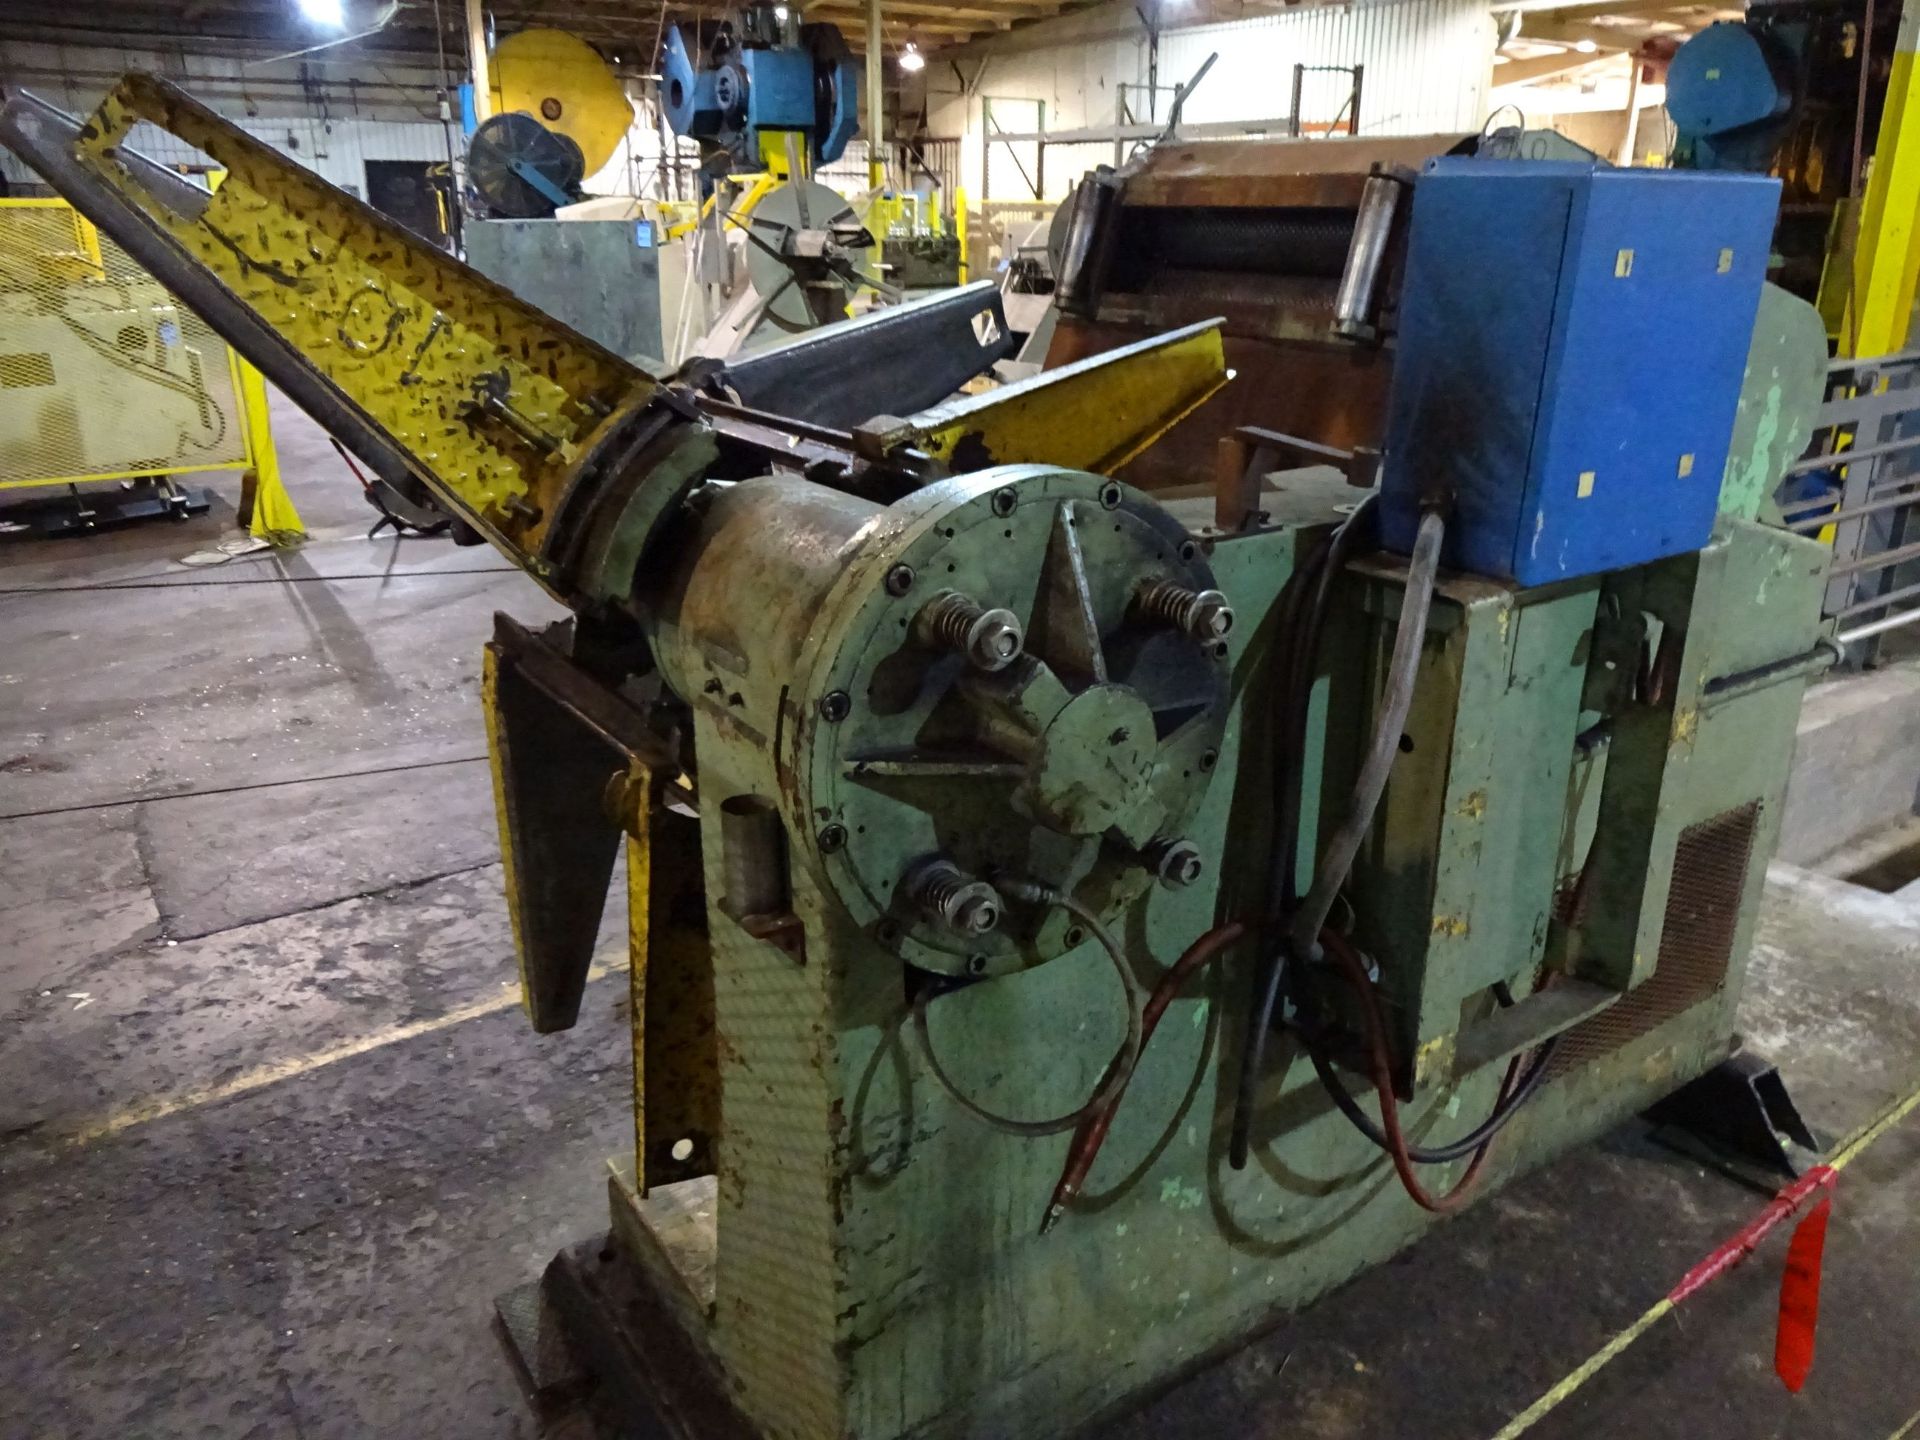 24" WIDE AUTOMATIC FEED CO. MODEL 10-4-2460 SINGLE END COIL REEL; S/N 1433 WITH STRAIGHTENER - Image 6 of 6